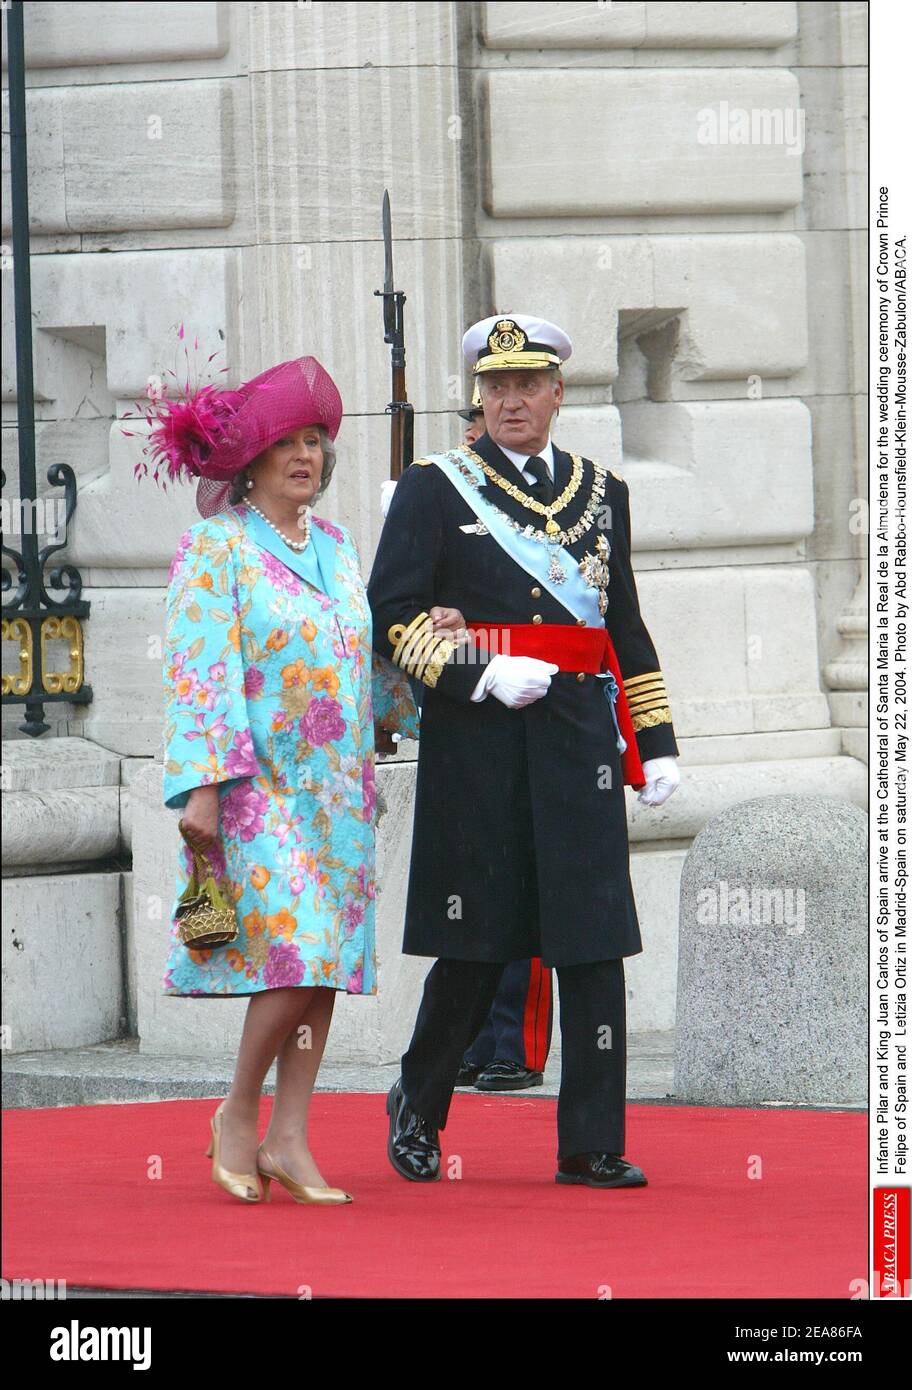 Infante Pilar and King Juan Carlos of Spain arrive at the Cathedral of Santa Maria la Real de la Almudena for the wedding ceremony of Crown Prince Felipe of Spain and Letizia Ortiz in Madrid-Spain on saturday May 22, 2004. Photo by Abd Rabbo-Hounsfield-Klein-Mousse-Zabulon/ABACA. Stock Photo